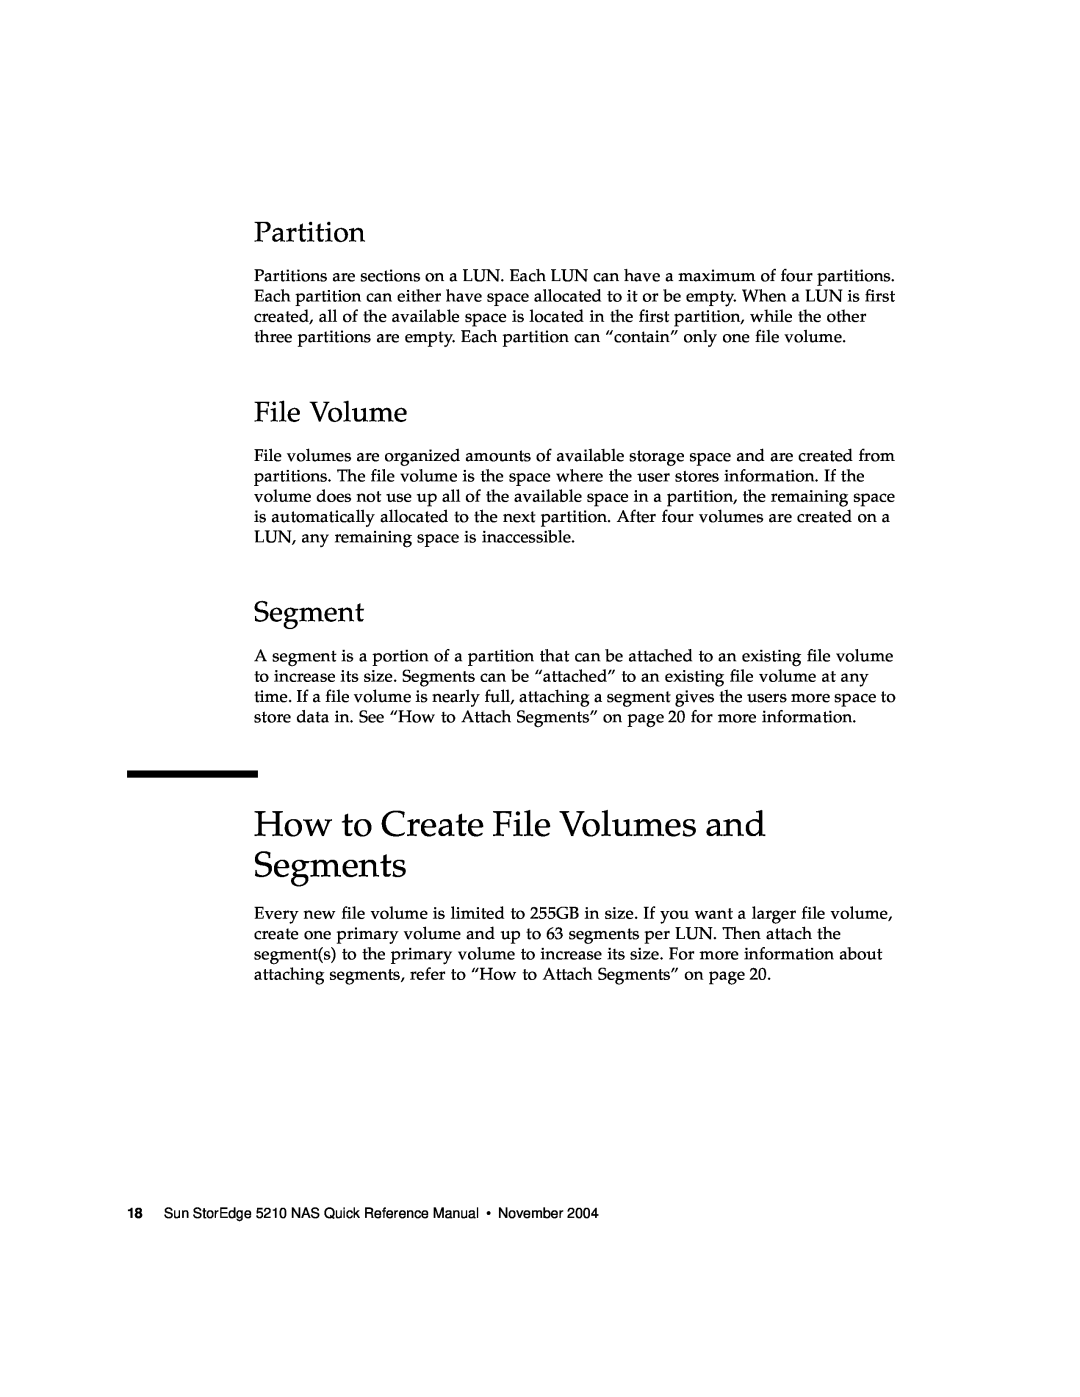 Sun Microsystems 5210 NAS manual How to Create File Volumes and Segments, Partition 